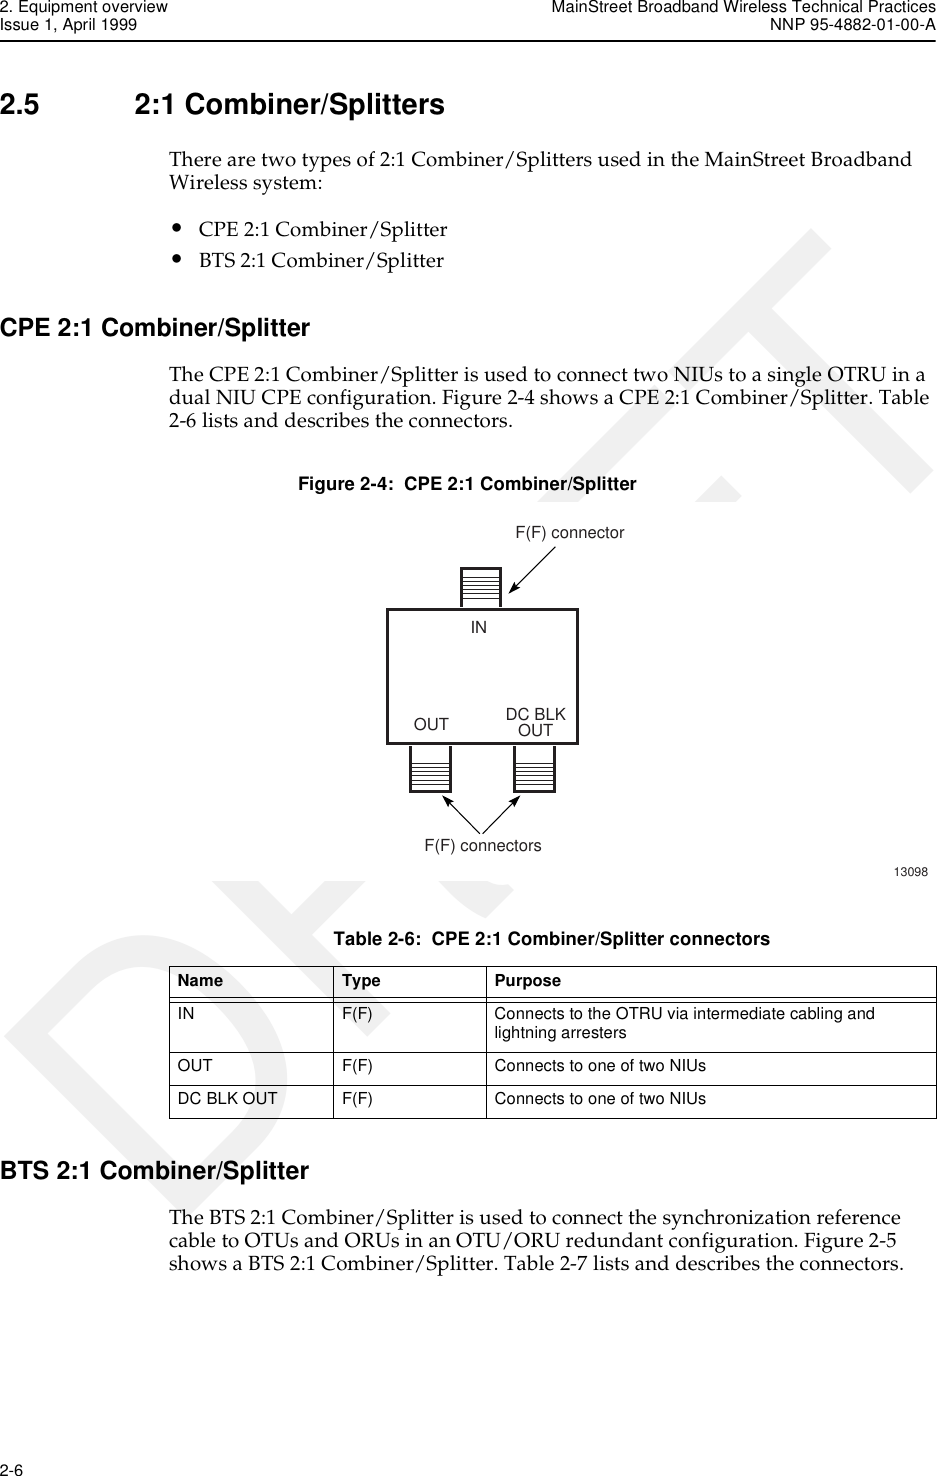 2. Equipment overview MainStreet Broadband Wireless Technical PracticesIssue 1, April 1999 NNP 95-4882-01-00-A2-6   DRAFT2.5 2:1 Combiner/SplittersThere are two types of 2:1 Combiner/Splitters used in the MainStreet Broadband Wireless system:•CPE 2:1 Combiner/Splitter•BTS 2:1 Combiner/SplitterCPE 2:1 Combiner/SplitterThe CPE 2:1 Combiner/Splitter is used to connect two NIUs to a single OTRU in a dual NIU CPE configuration. Figure 2-4 shows a CPE 2:1 Combiner/Splitter. Table 2-6 lists and describes the connectors.Figure 2-4:  CPE 2:1 Combiner/SplitterTable 2-6:  CPE 2:1 Combiner/Splitter connectorsBTS 2:1 Combiner/SplitterThe BTS 2:1 Combiner/Splitter is used to connect the synchronization reference cable to OTUs and ORUs in an OTU/ORU redundant configuration. Figure 2-5 shows a BTS 2:1 Combiner/Splitter. Table 2-7 lists and describes the connectors.13098F(F) connectorINOUT DC BLKOUTF(F) connectorsName Type PurposeIN F(F) Connects to the OTRU via intermediate cabling and lightning arrestersOUT F(F) Connects to one of two NIUsDC BLK OUT F(F) Connects to one of two NIUs